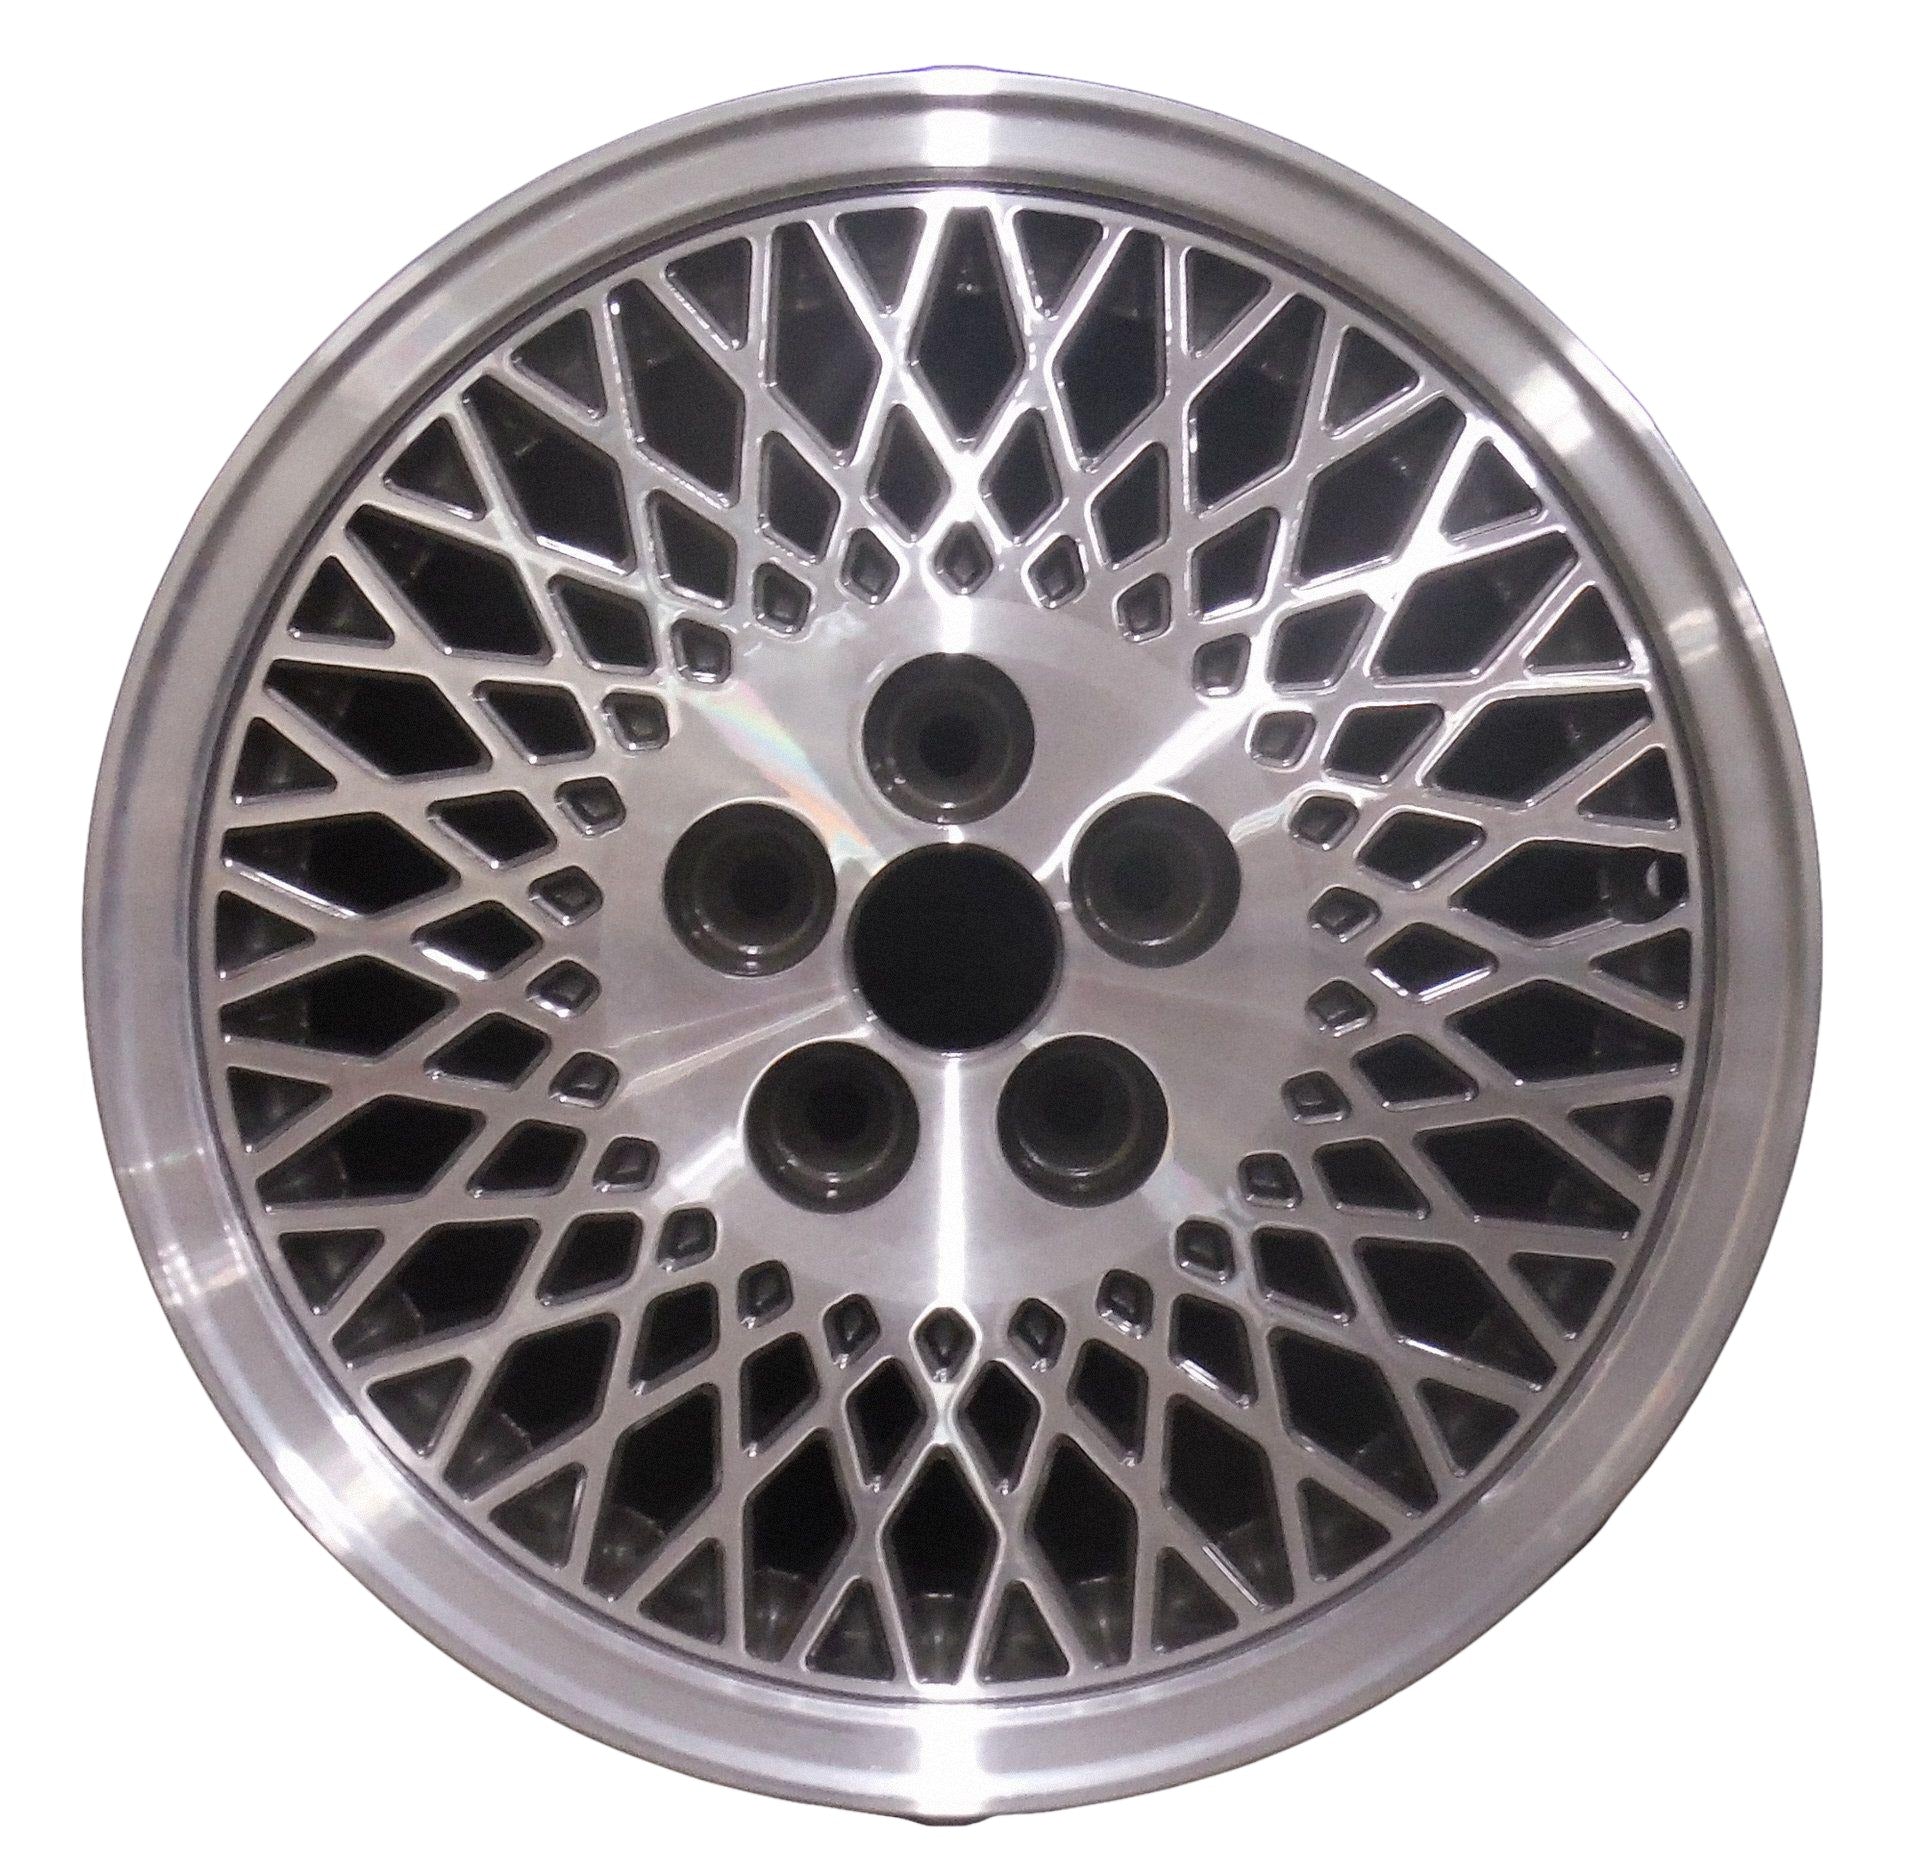 Chrysler New Yorker LHS  1989, 1990, 1991 Factory OEM Car Wheel Size 15x6 Alloy WAO.1689.PC08.MA